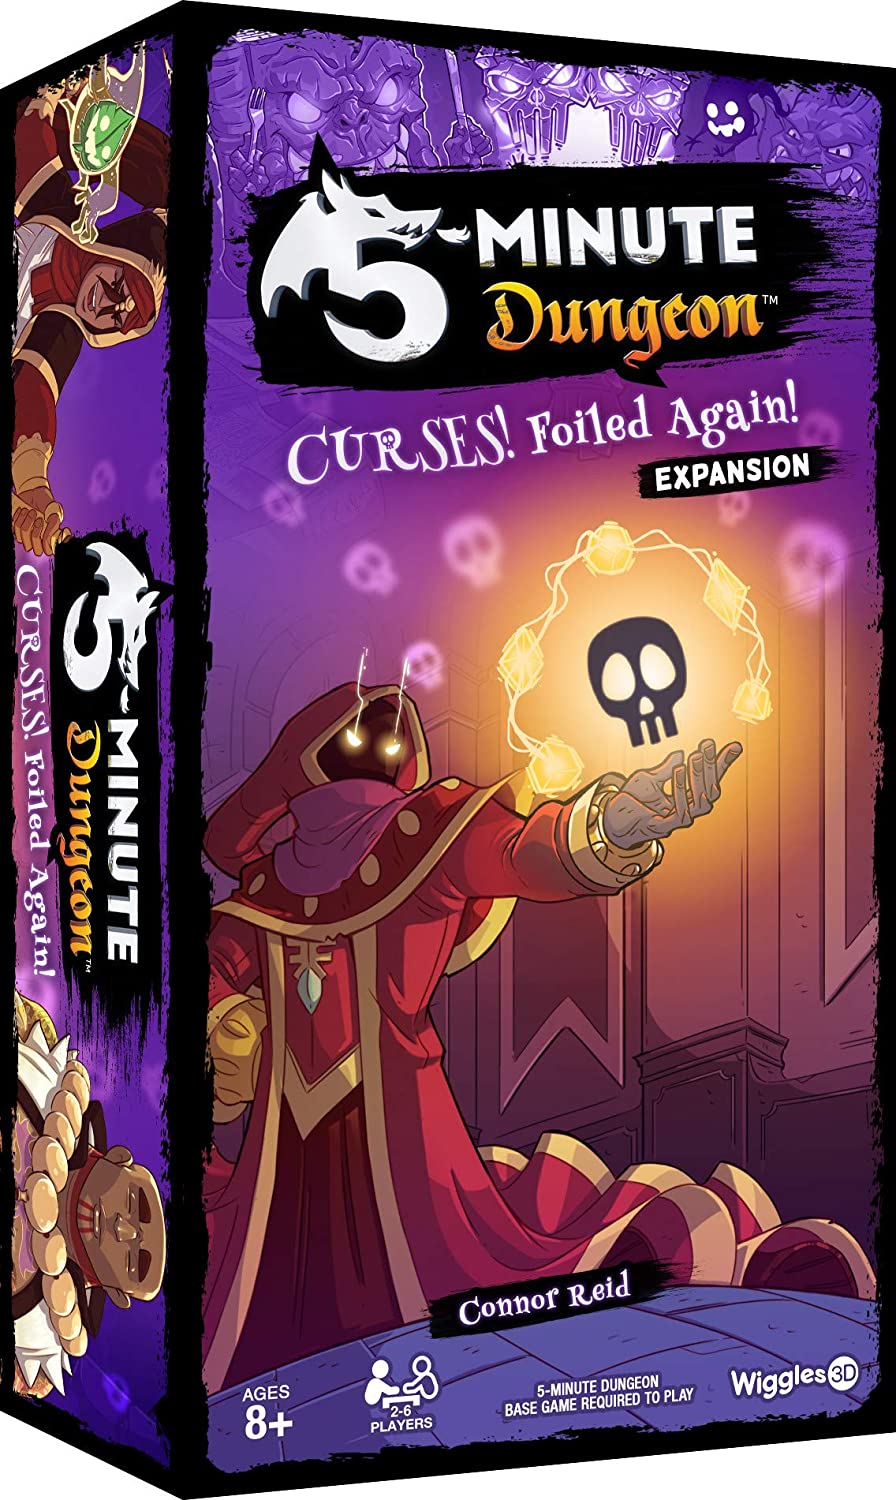 5-Minute Dungeon: Curses! Foiled Again! expansion